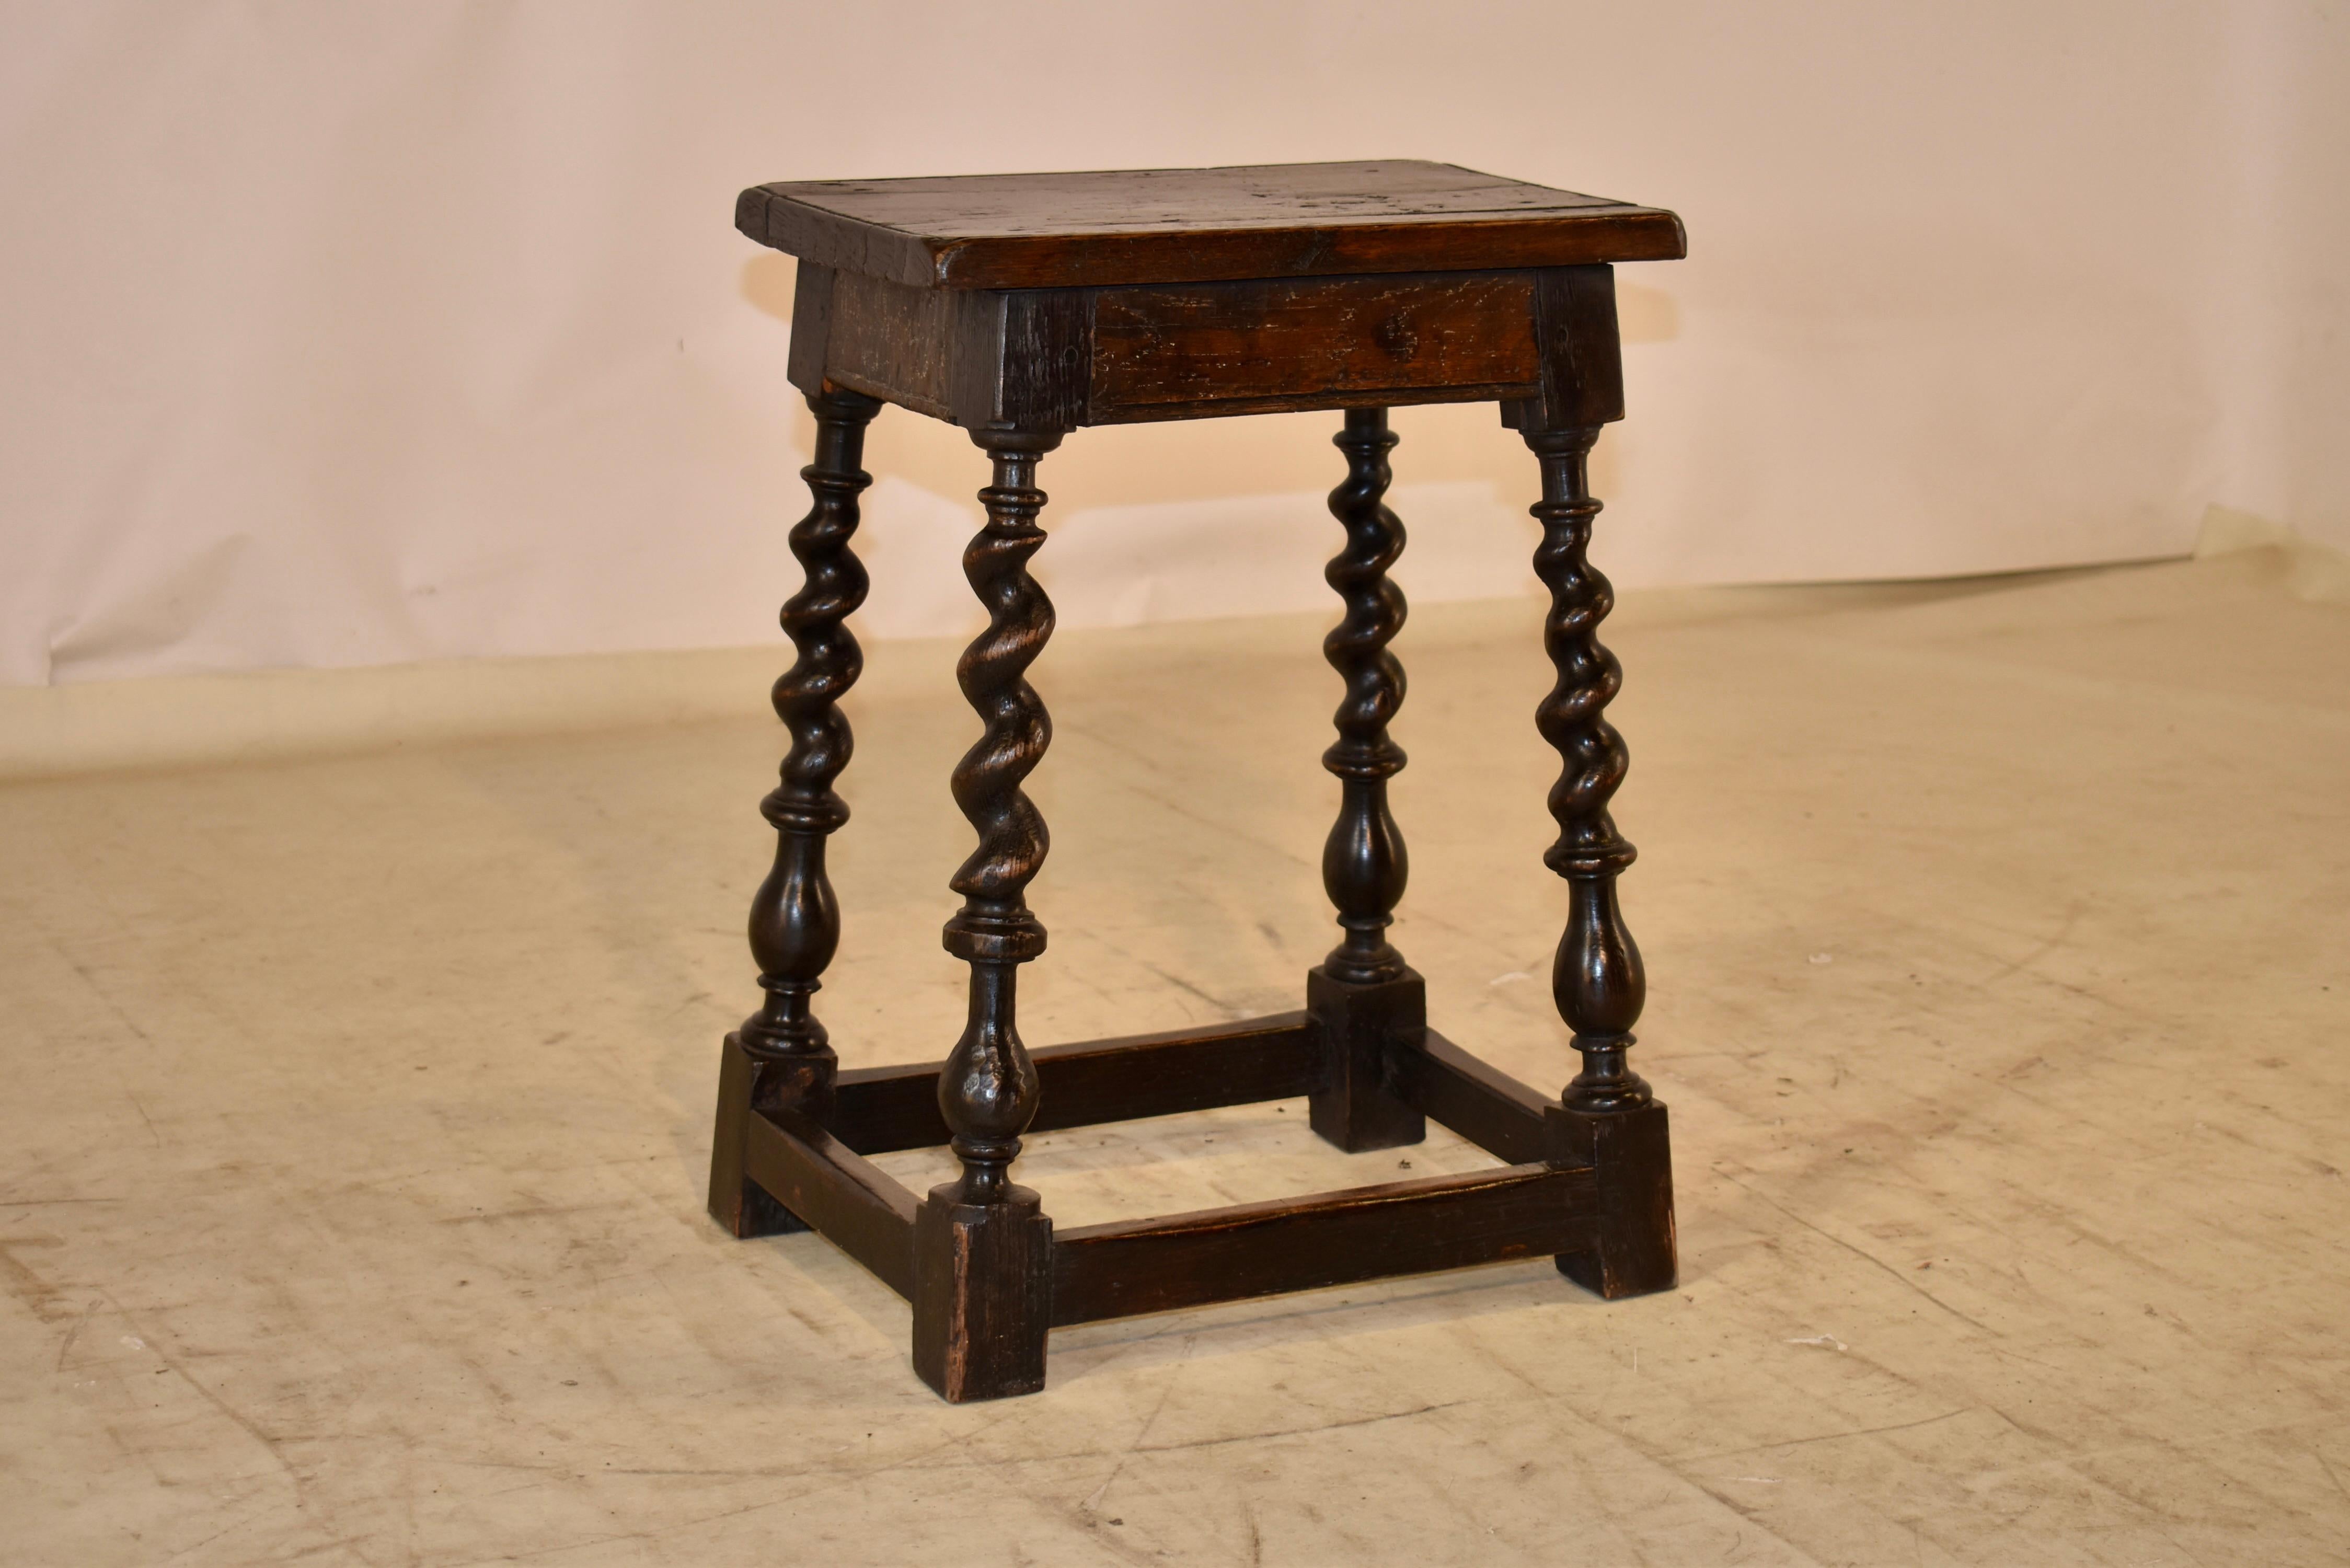 18th century oak joint stool from England. The stool is made from pegged construction and has a figured elm seat, which has routed edges for added design interest. This follows down to a simple apron and fantastic legs. the legs are splayed and are